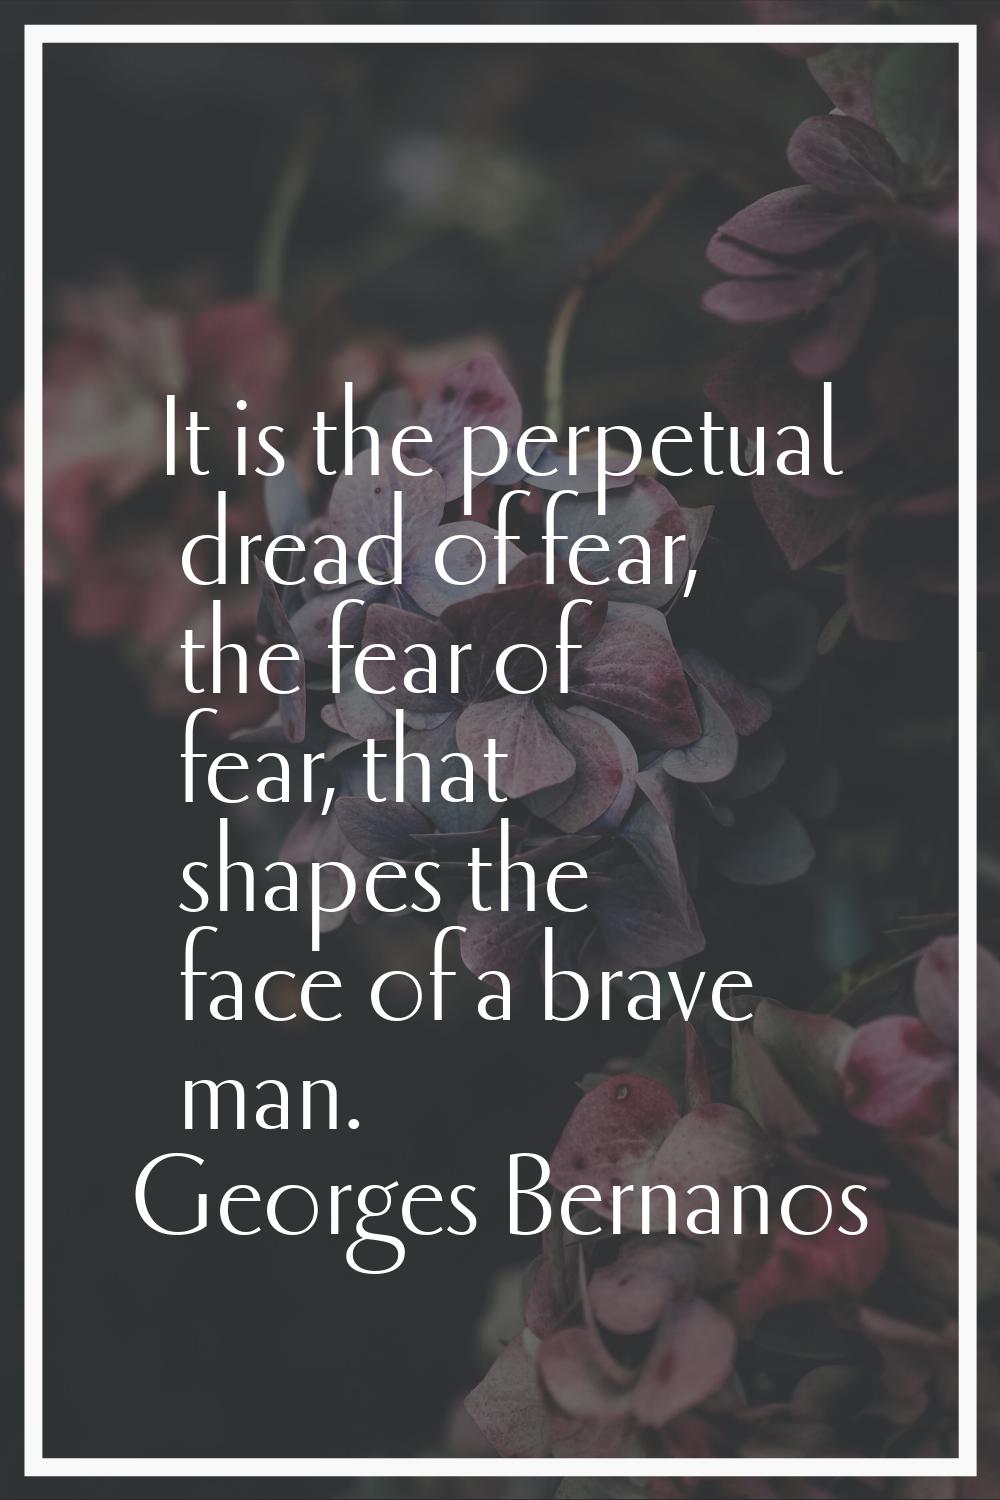 It is the perpetual dread of fear, the fear of fear, that shapes the face of a brave man.